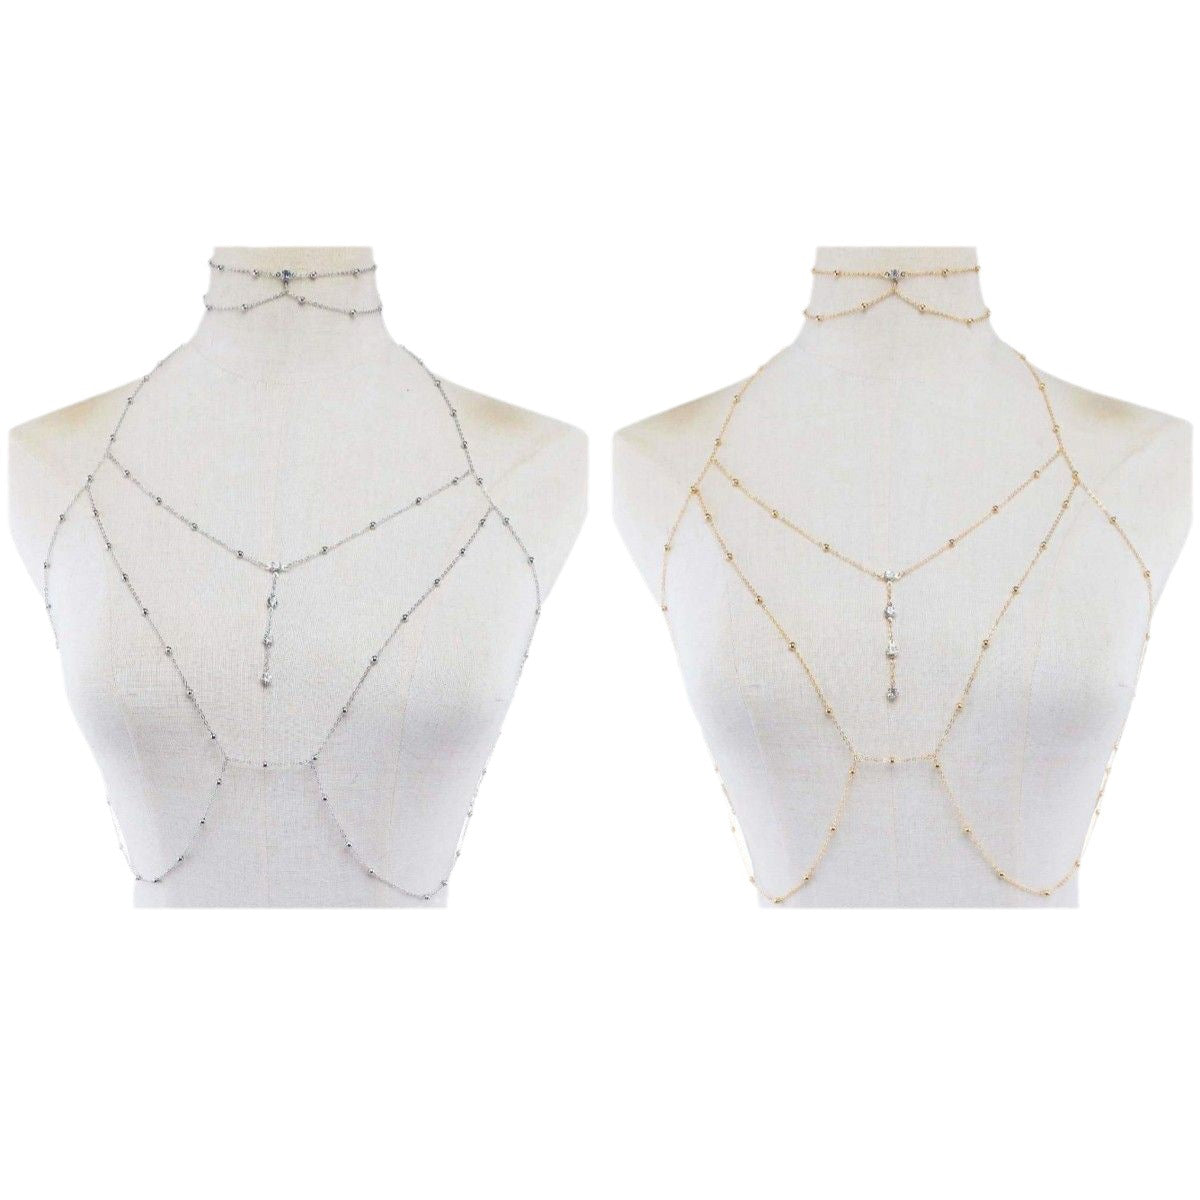 Women's Minority Light Luxury Hot Chest Body Chains Necklaces